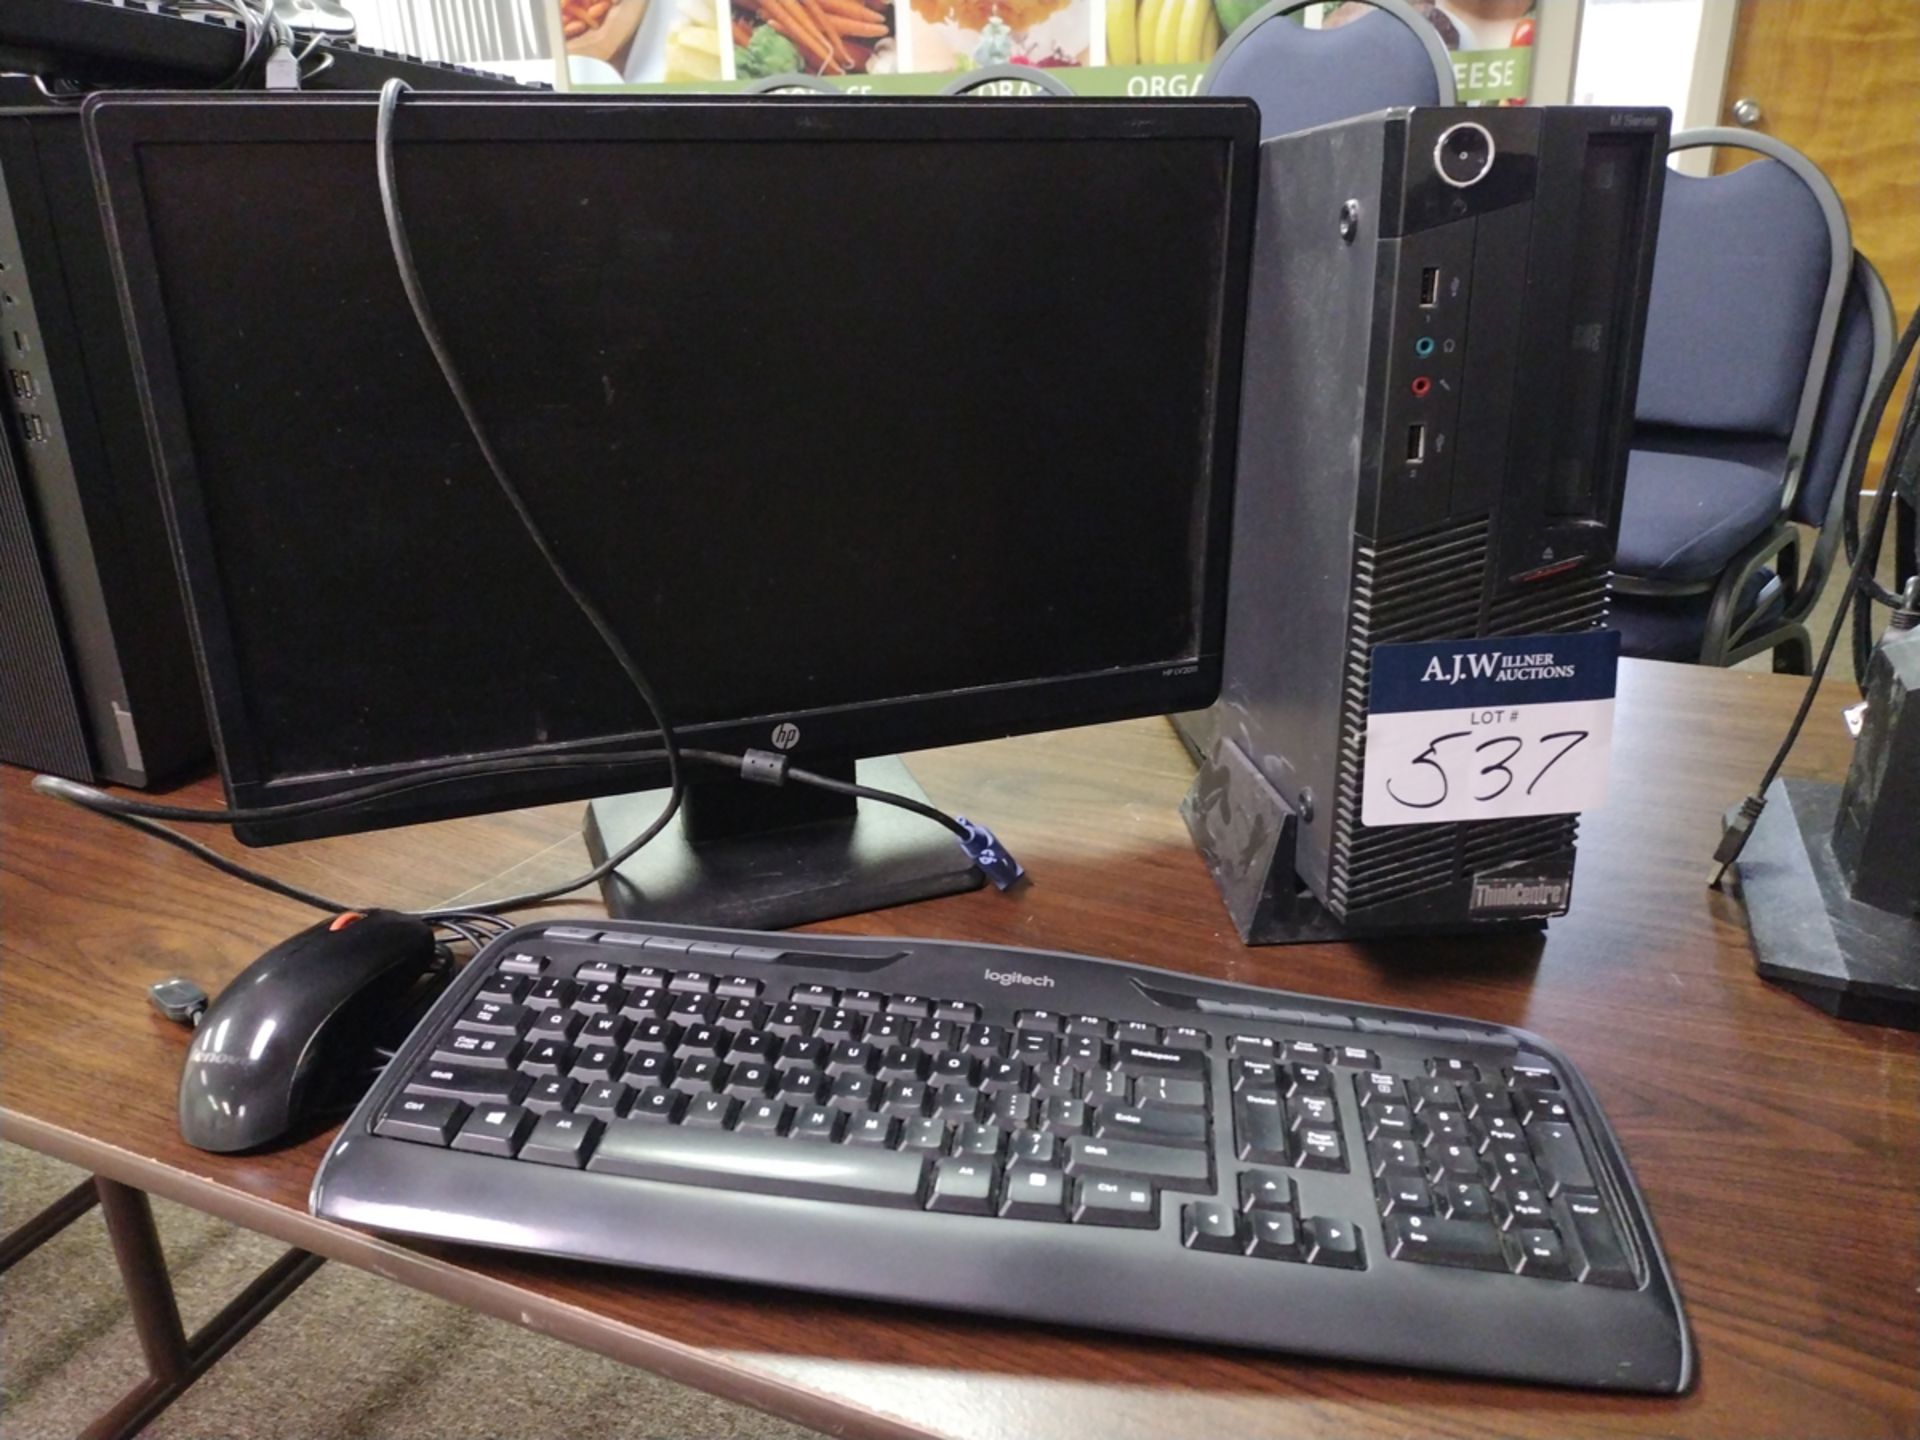 Lenovo CT0 M Series ThinkCentre i5 PC w/ Monitor and Keyboard